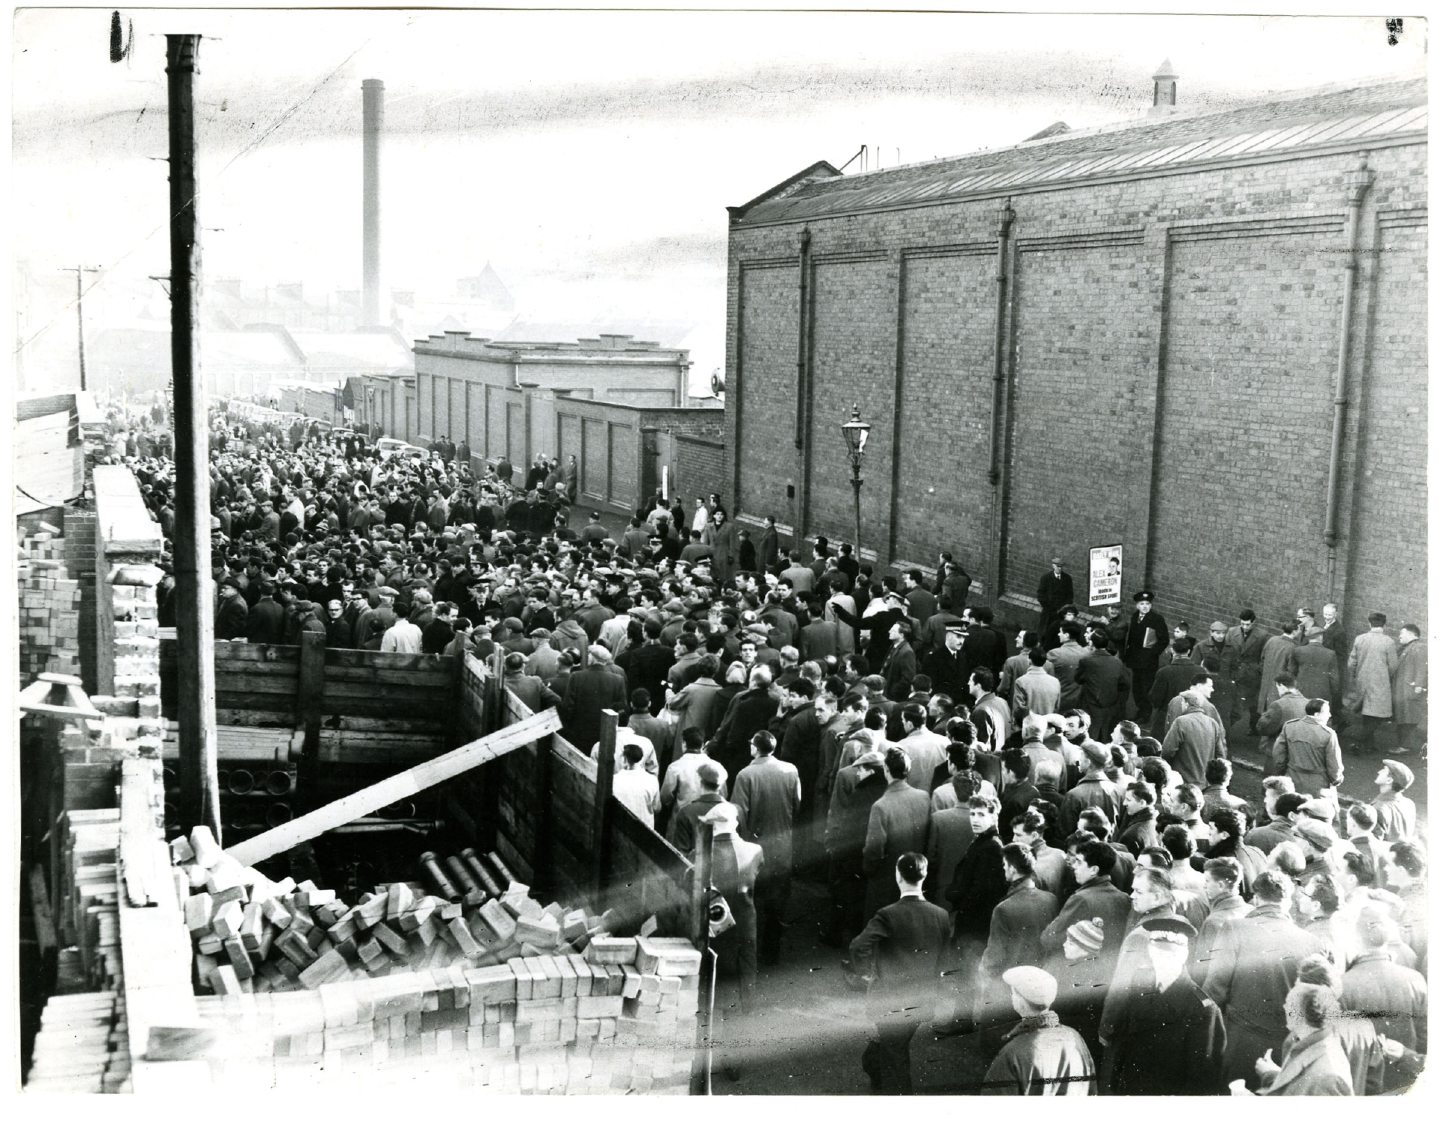 Crowds outside Tannadice in November 1961.